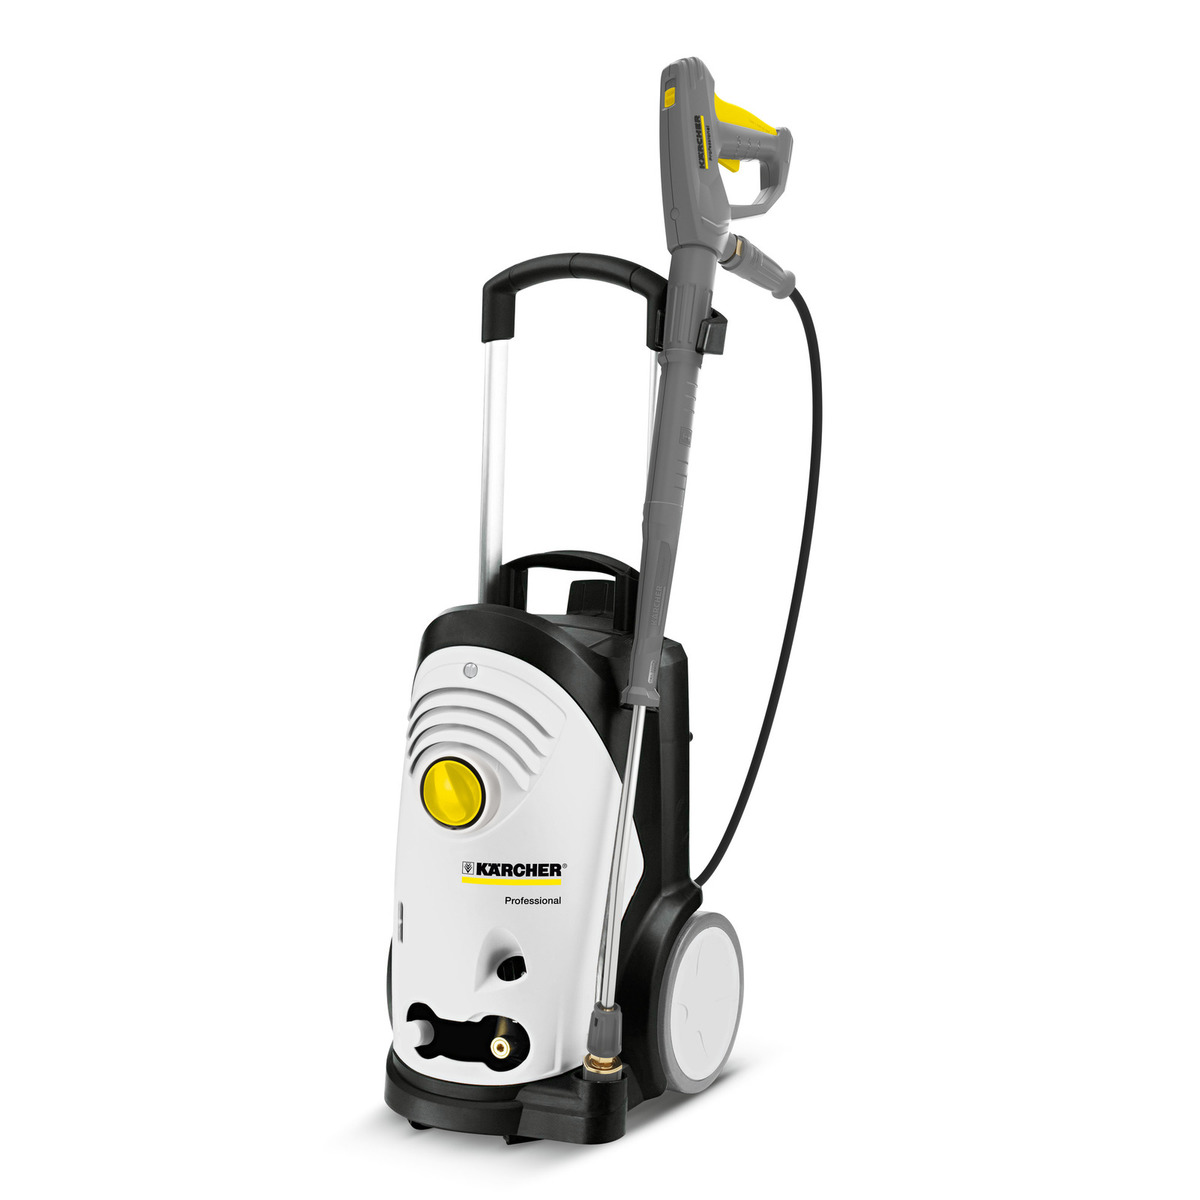 DEMO Karcher HD 2.3/14 C ED FOOD  karcher, HD, 2.3/14 C, ED, Food, cold-water, electric, cold, water, pressure, washer, commercial, professional, powerful, food safe, 